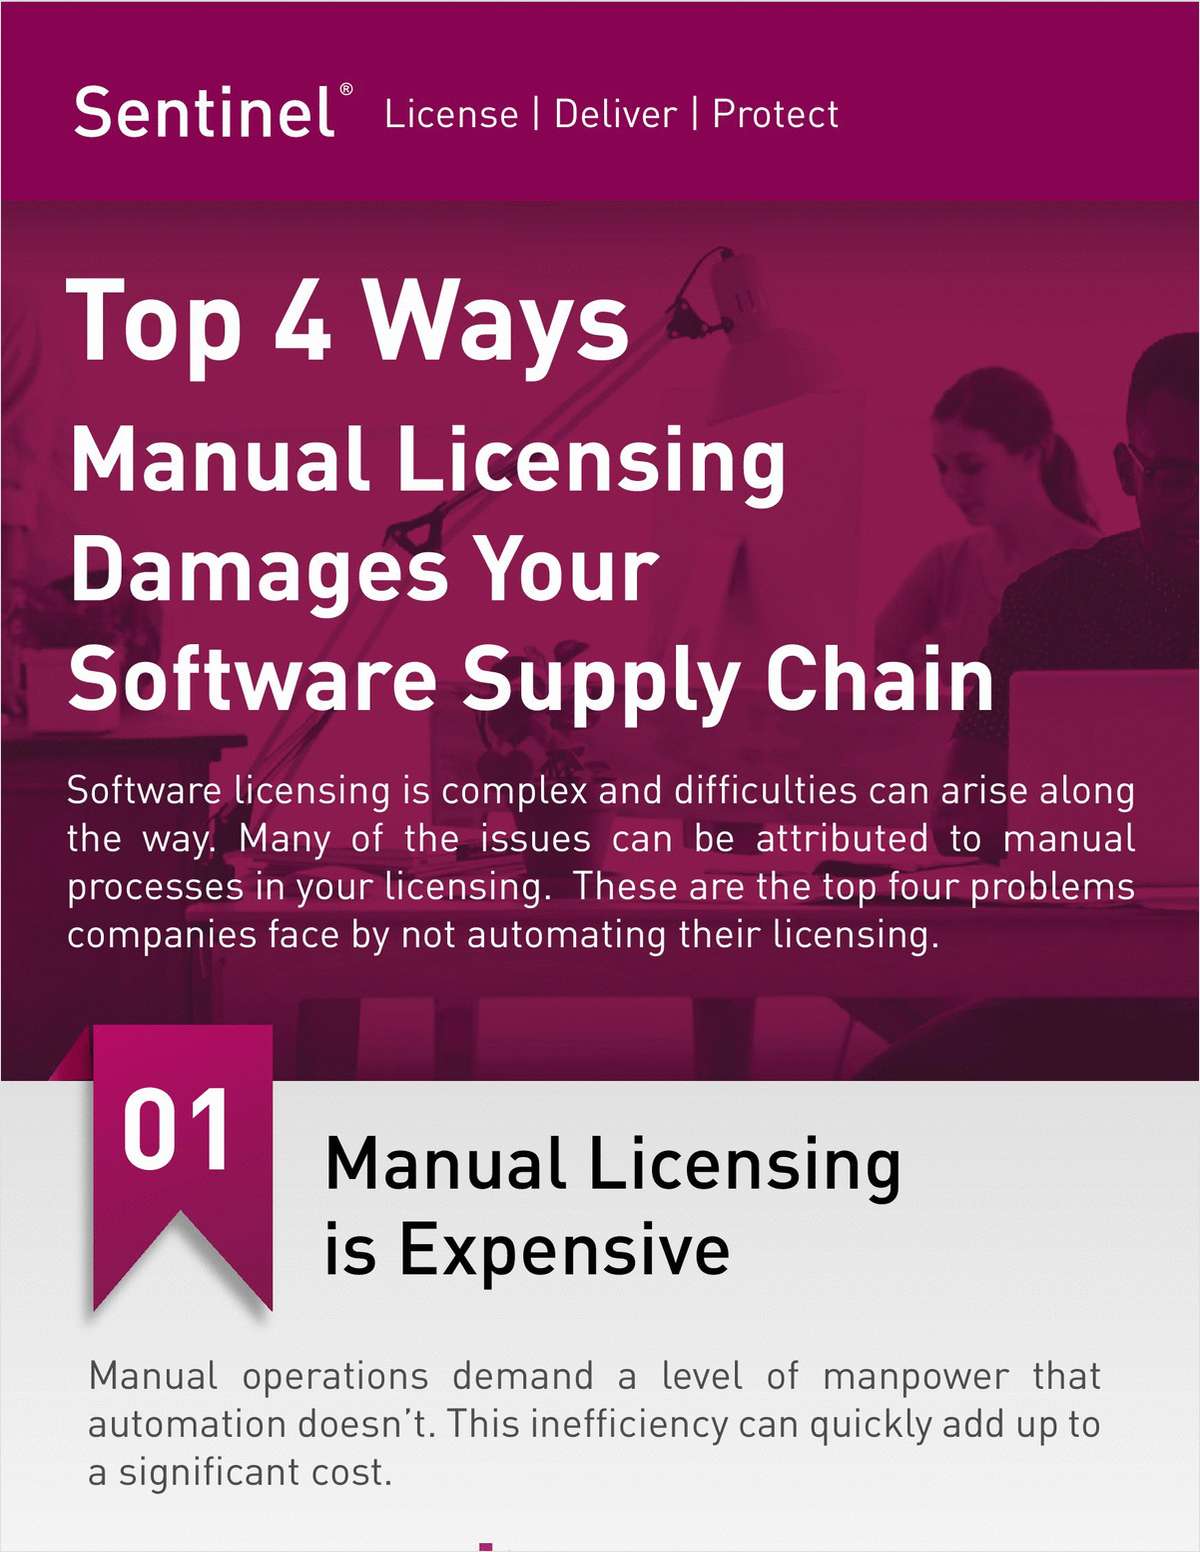 The Top 4 Ways Manual Licensing Damages Your Software Supply Chain